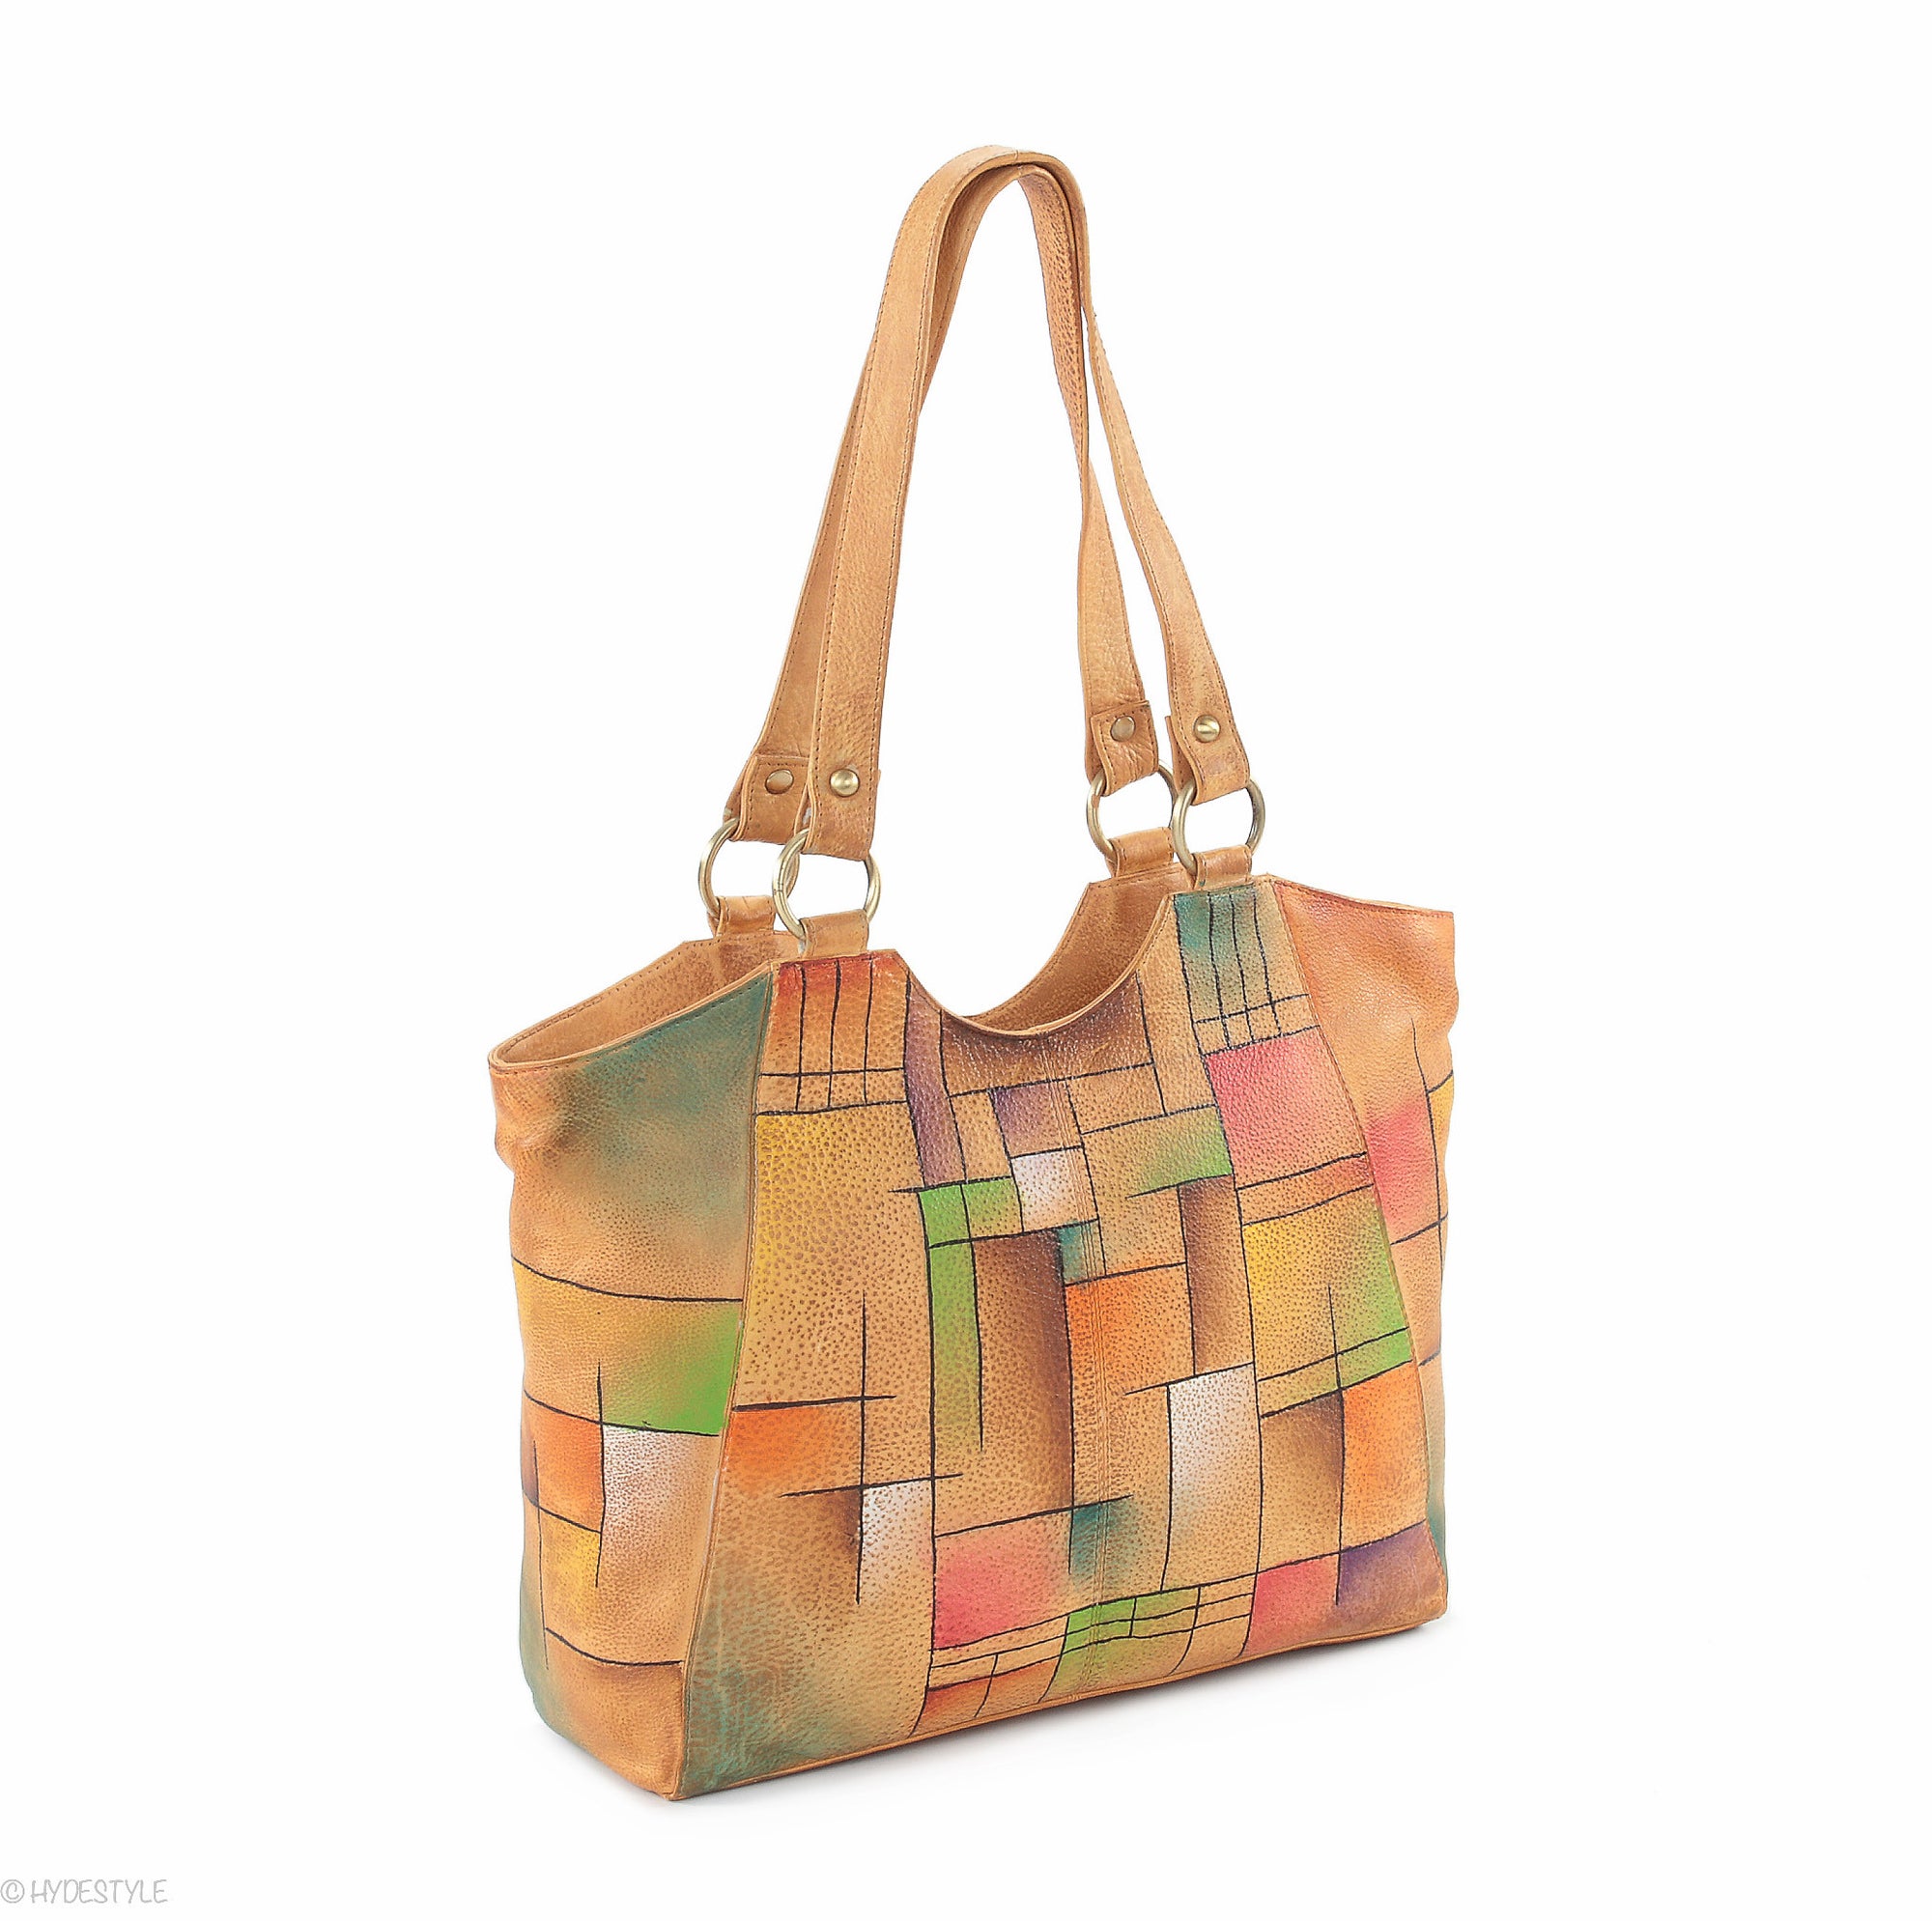 Picta Manu hand painted leather shopper bag #LB20 Abstract Square